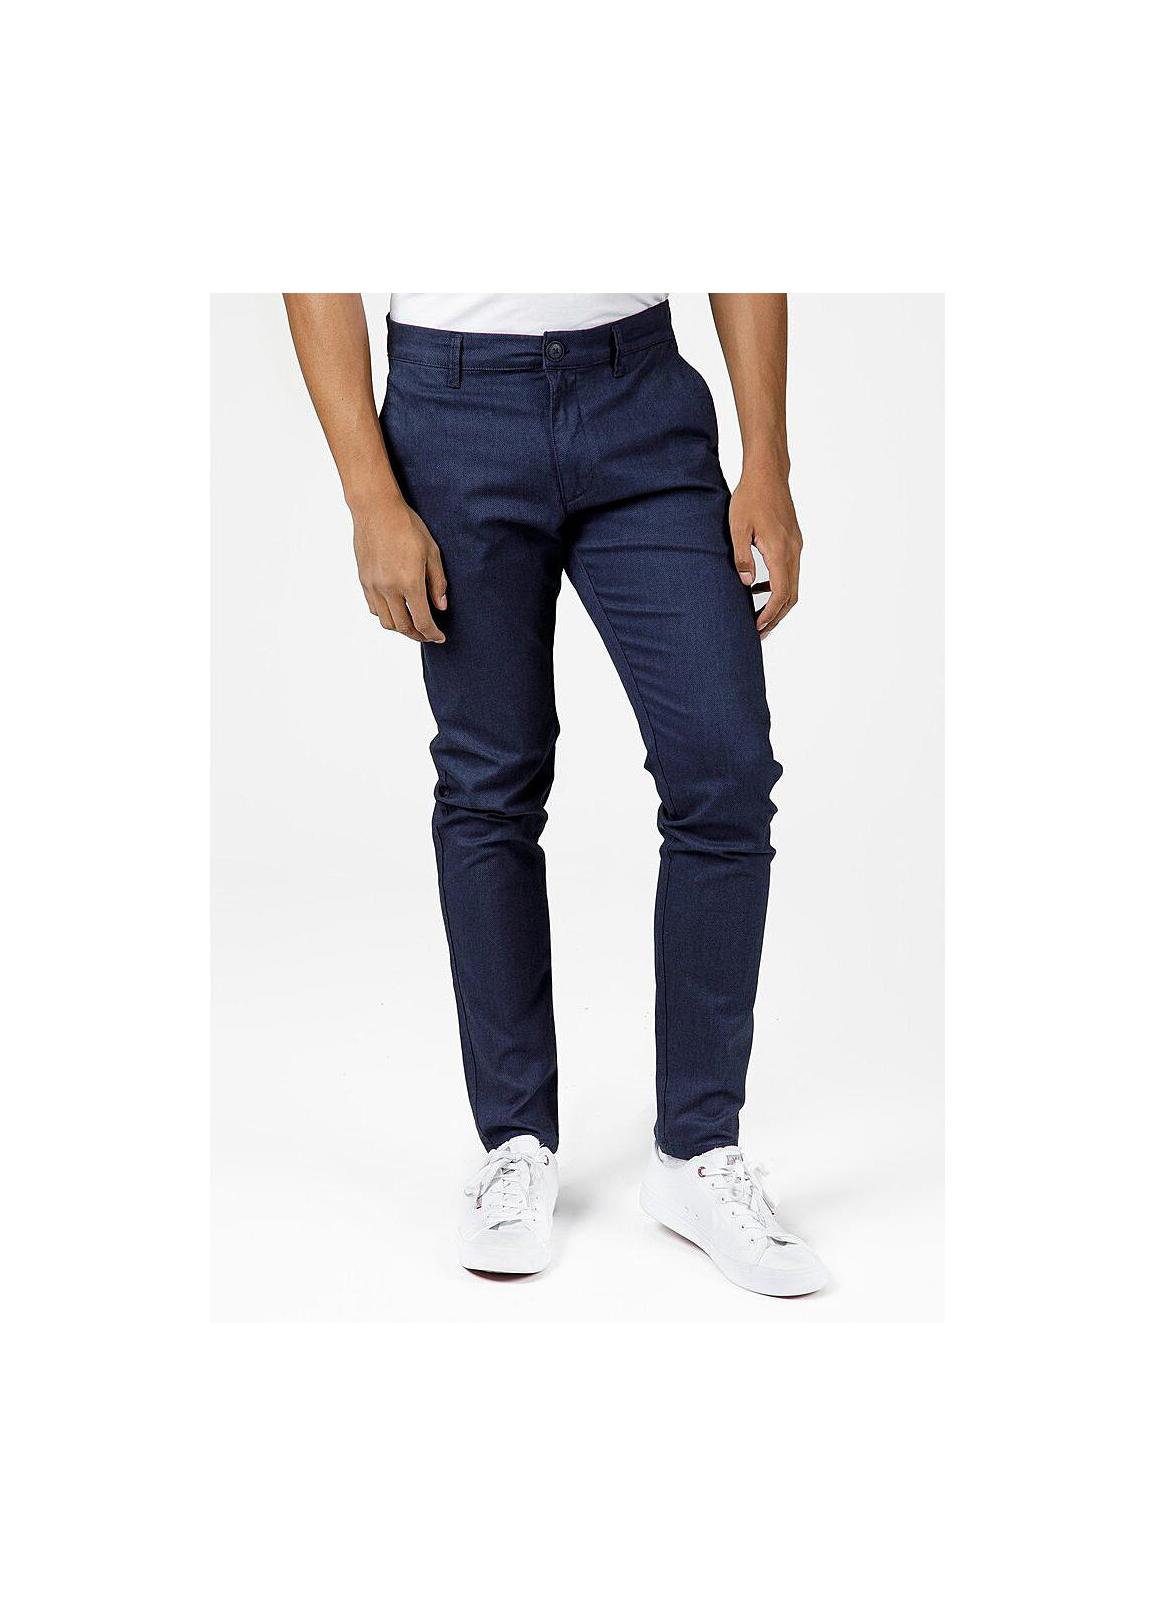 Cross Jeans® Chino Tapered Fit - Blue (046)